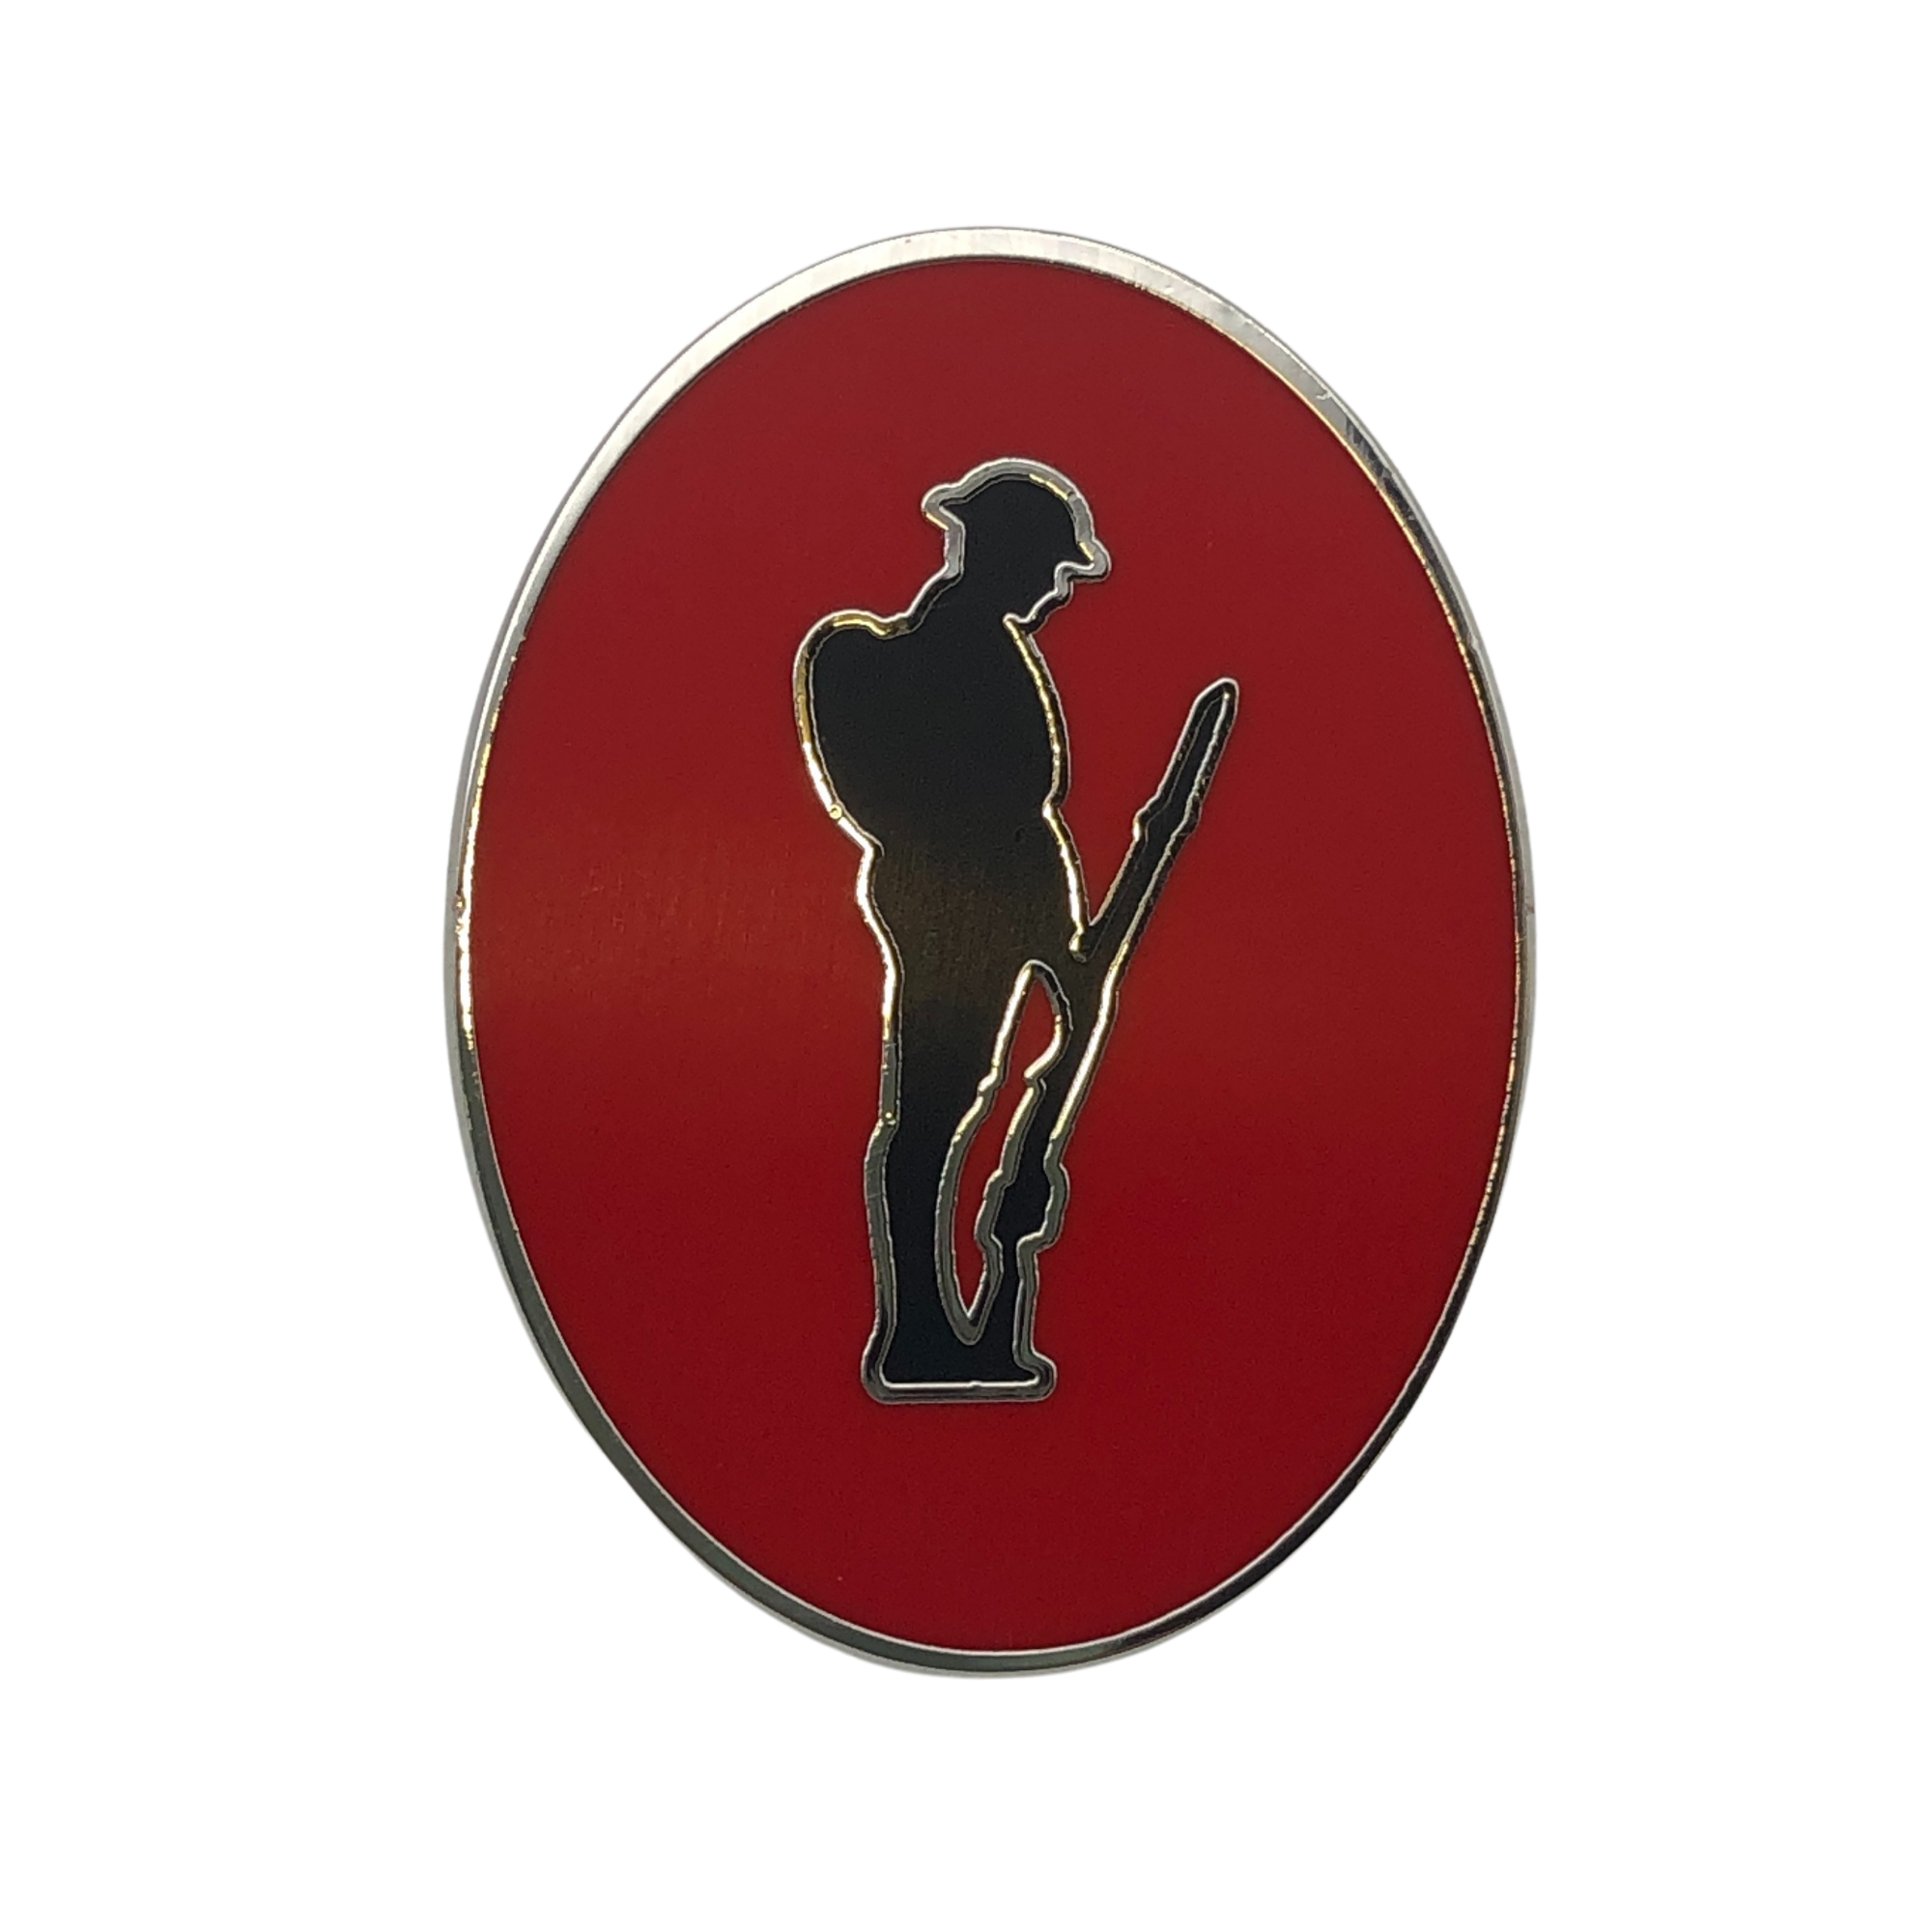 Tommy Remembrance 2021 Pin